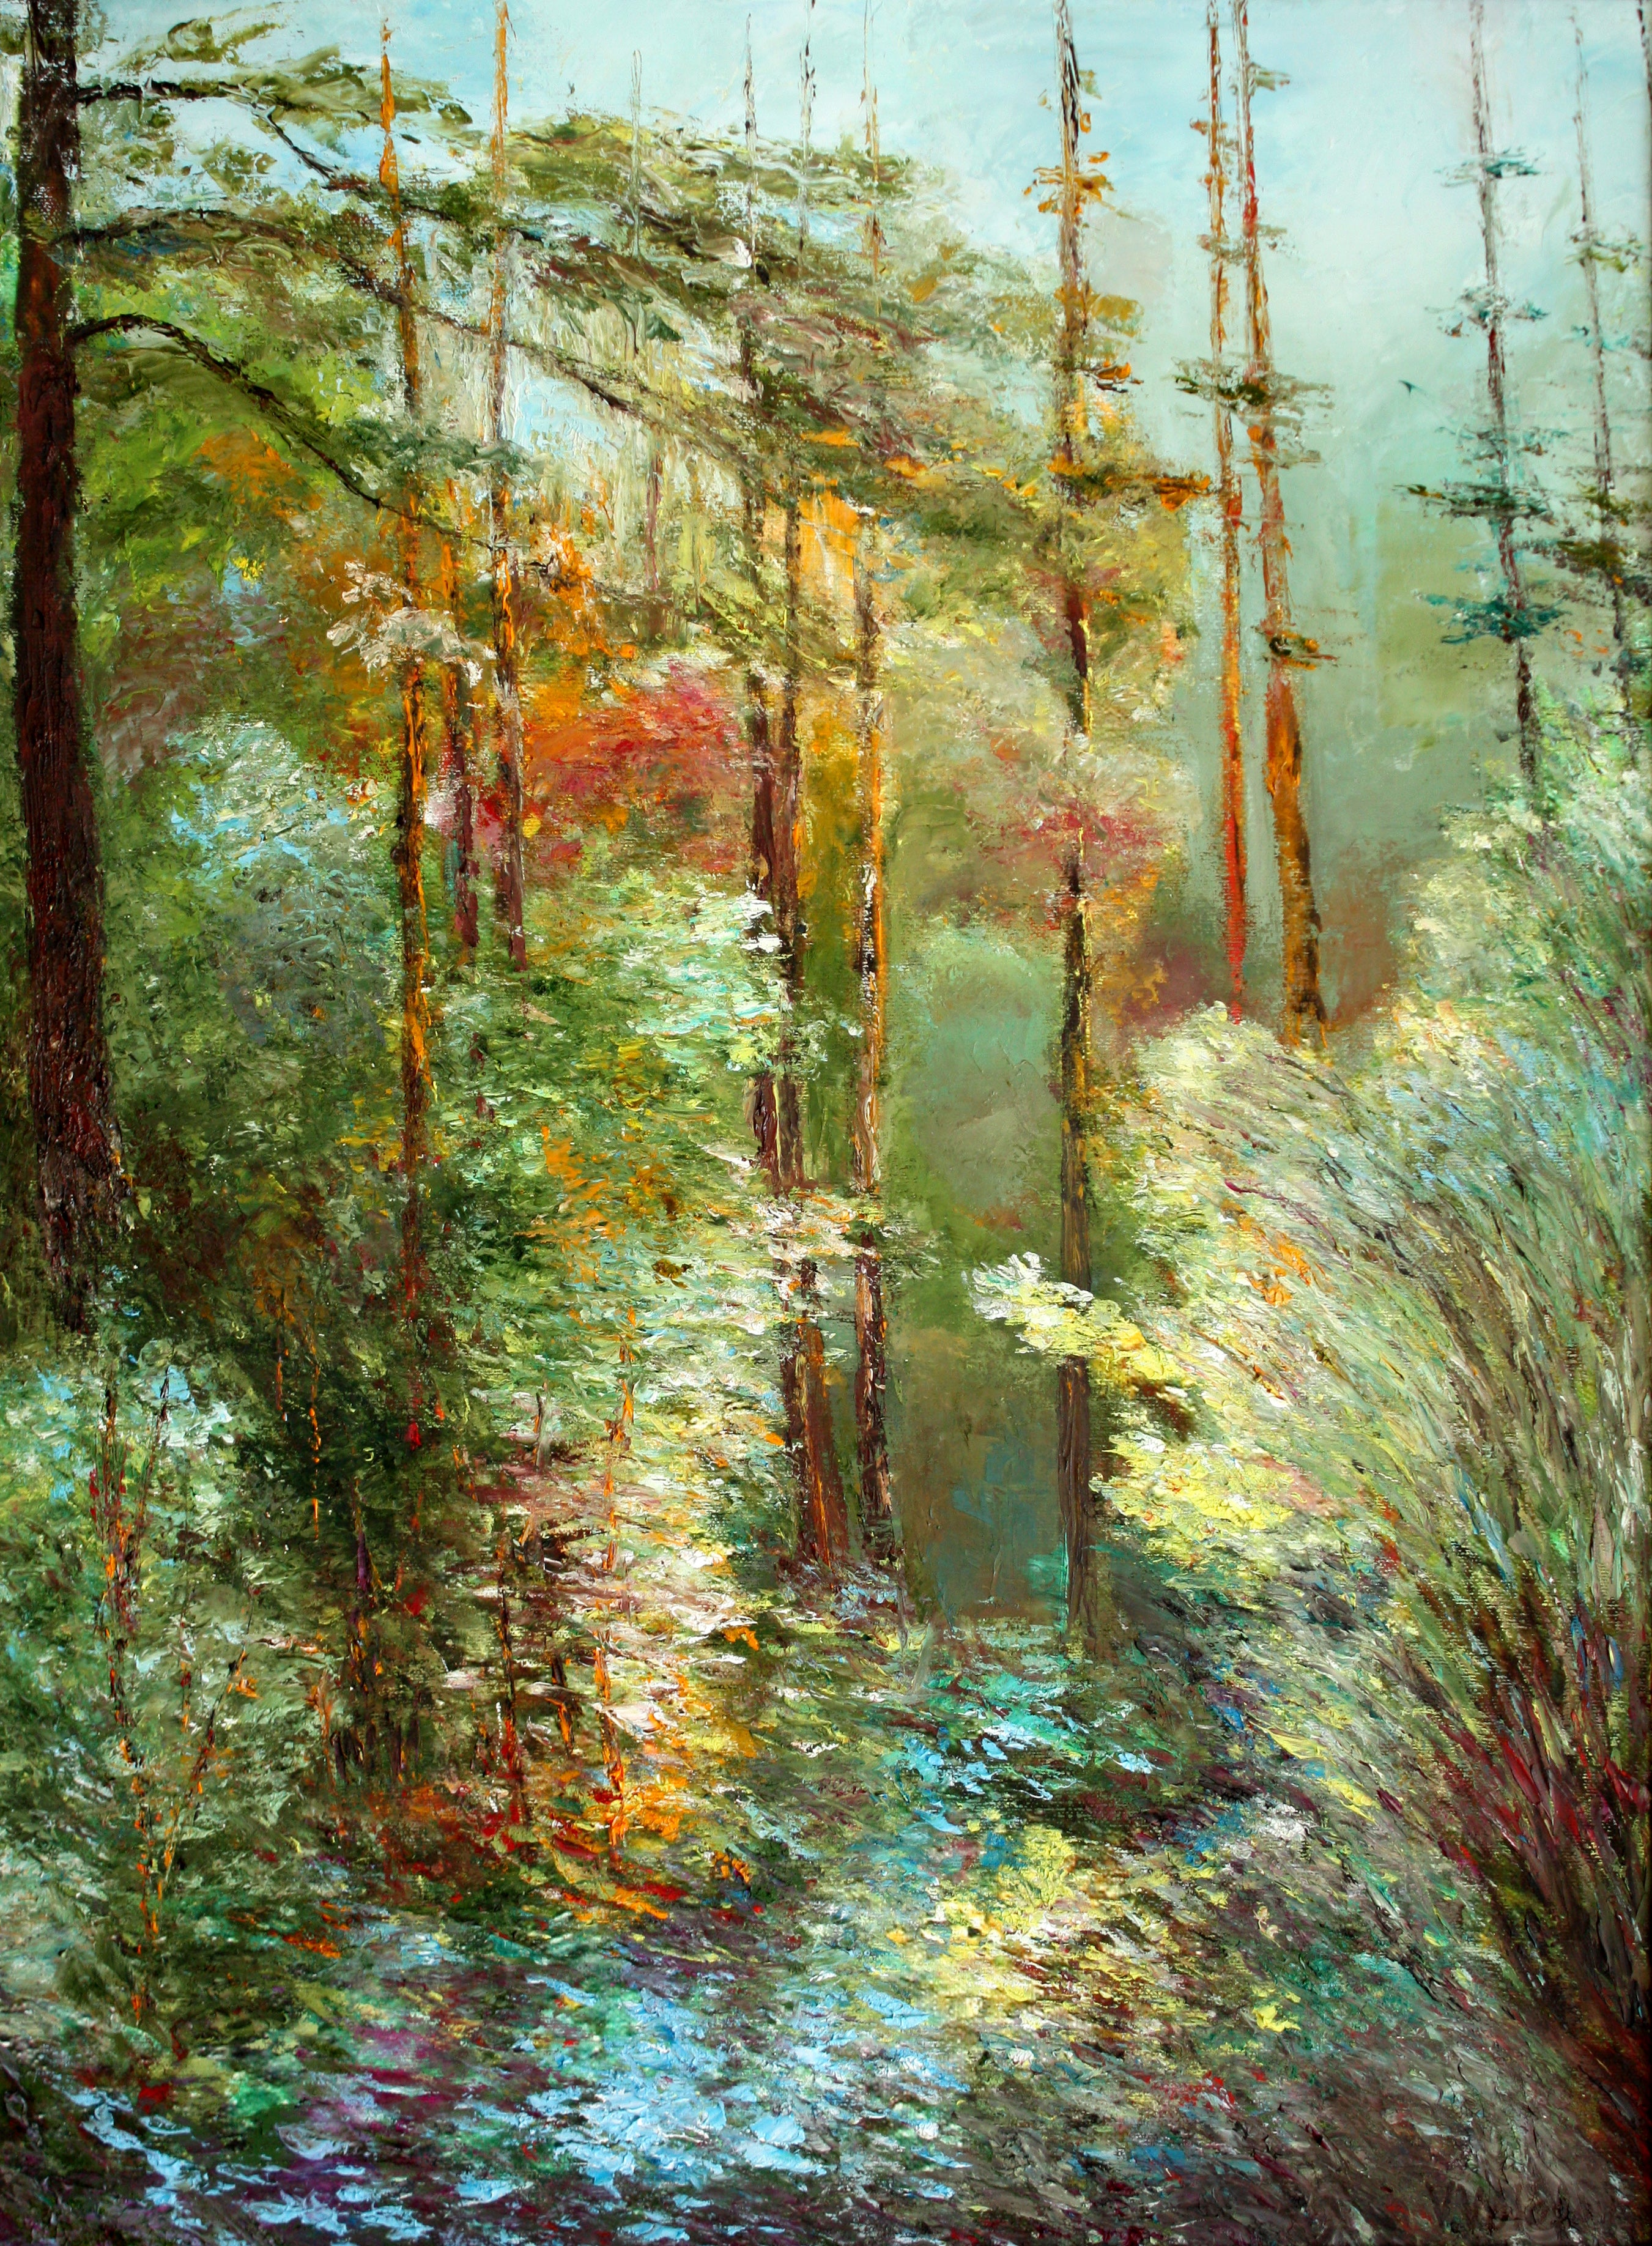 'LIGHT SHADOWS IN THE FOREST' - Oil on Canvas